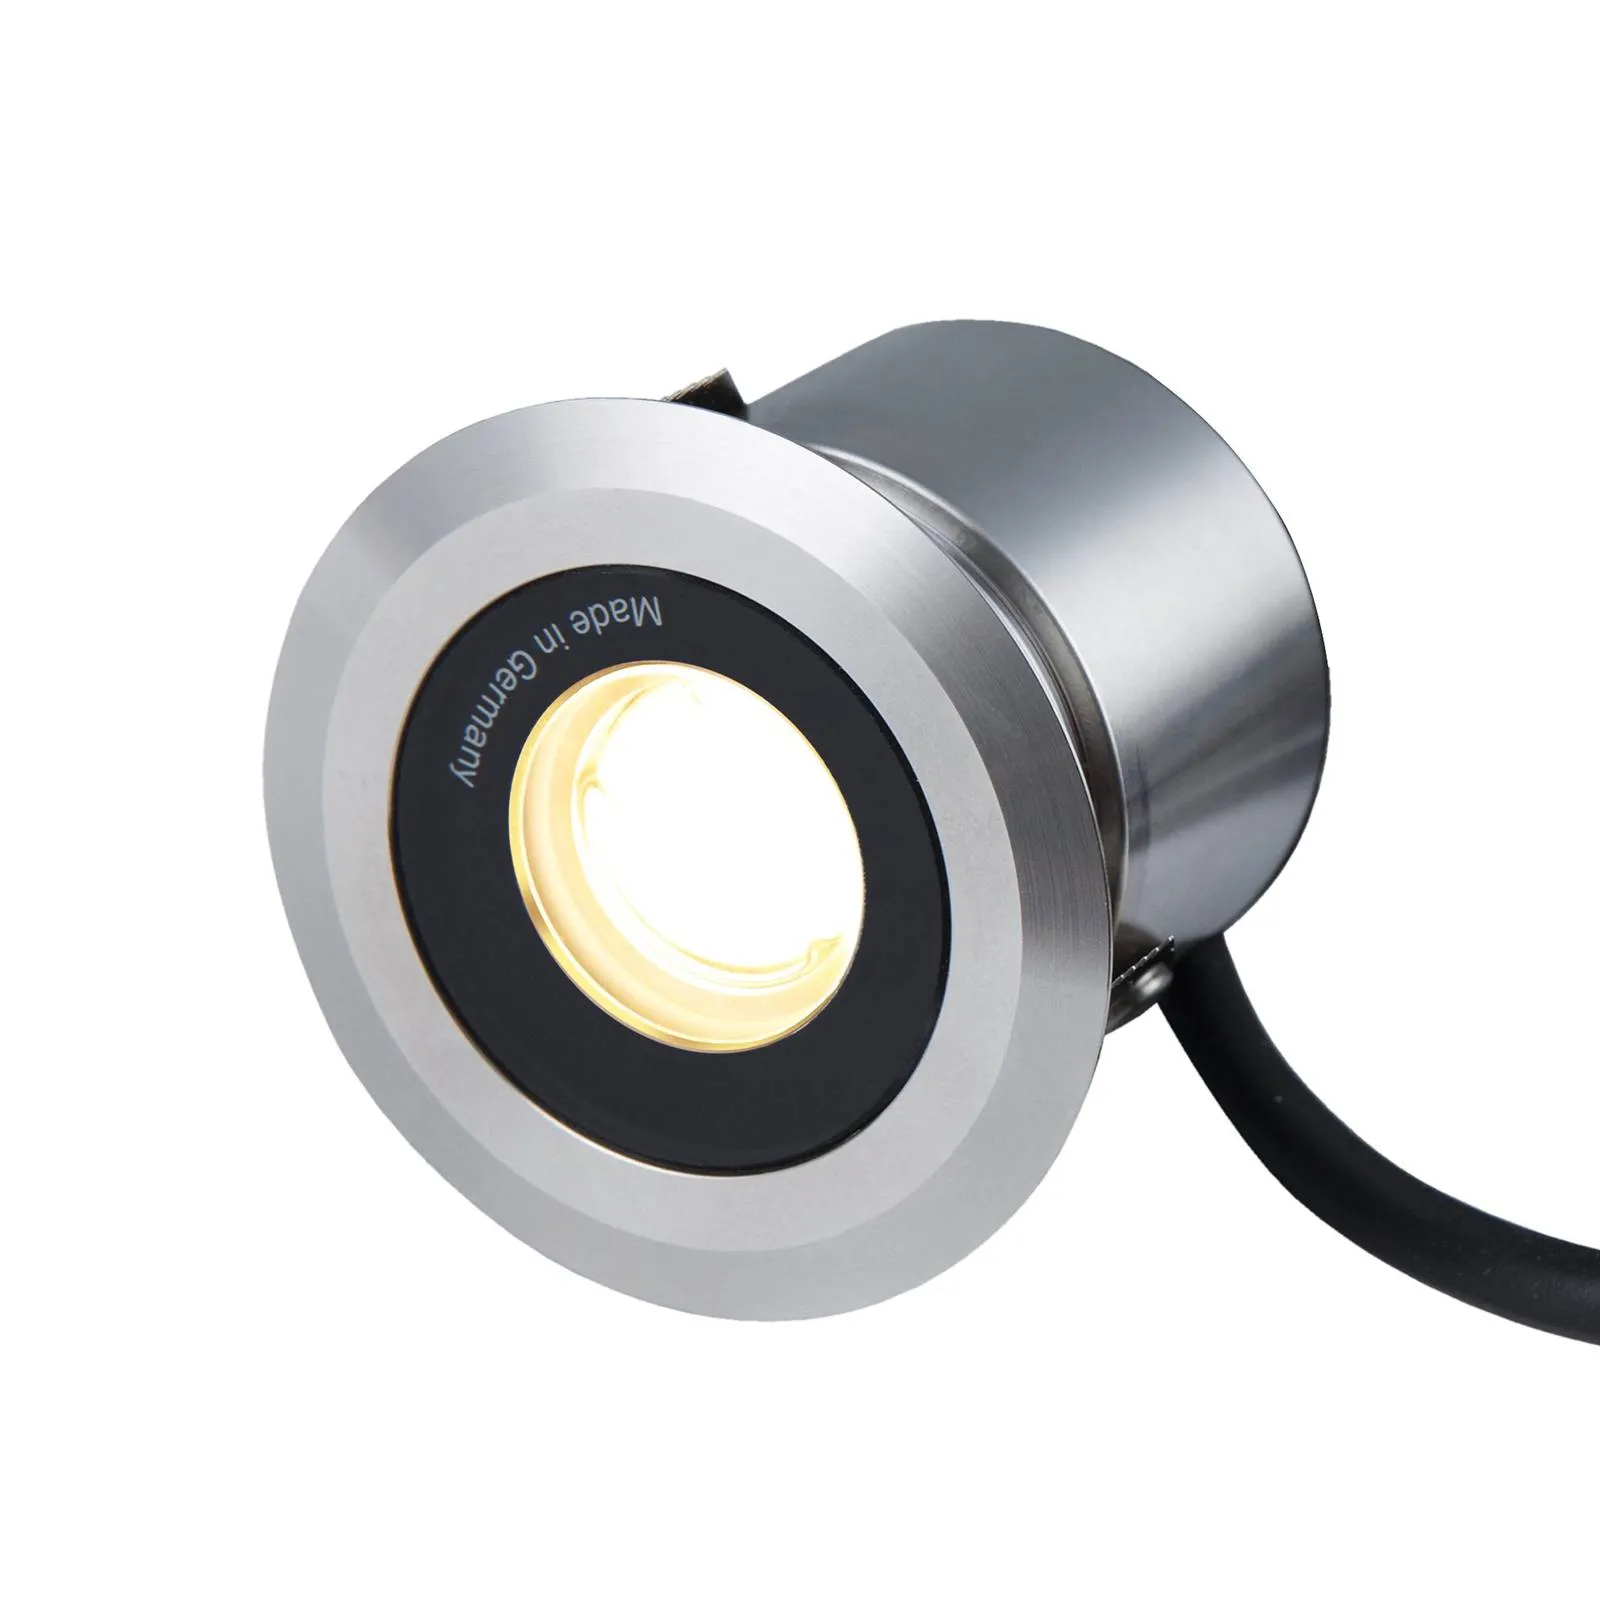 Thermoprotect LED deck light, IP68